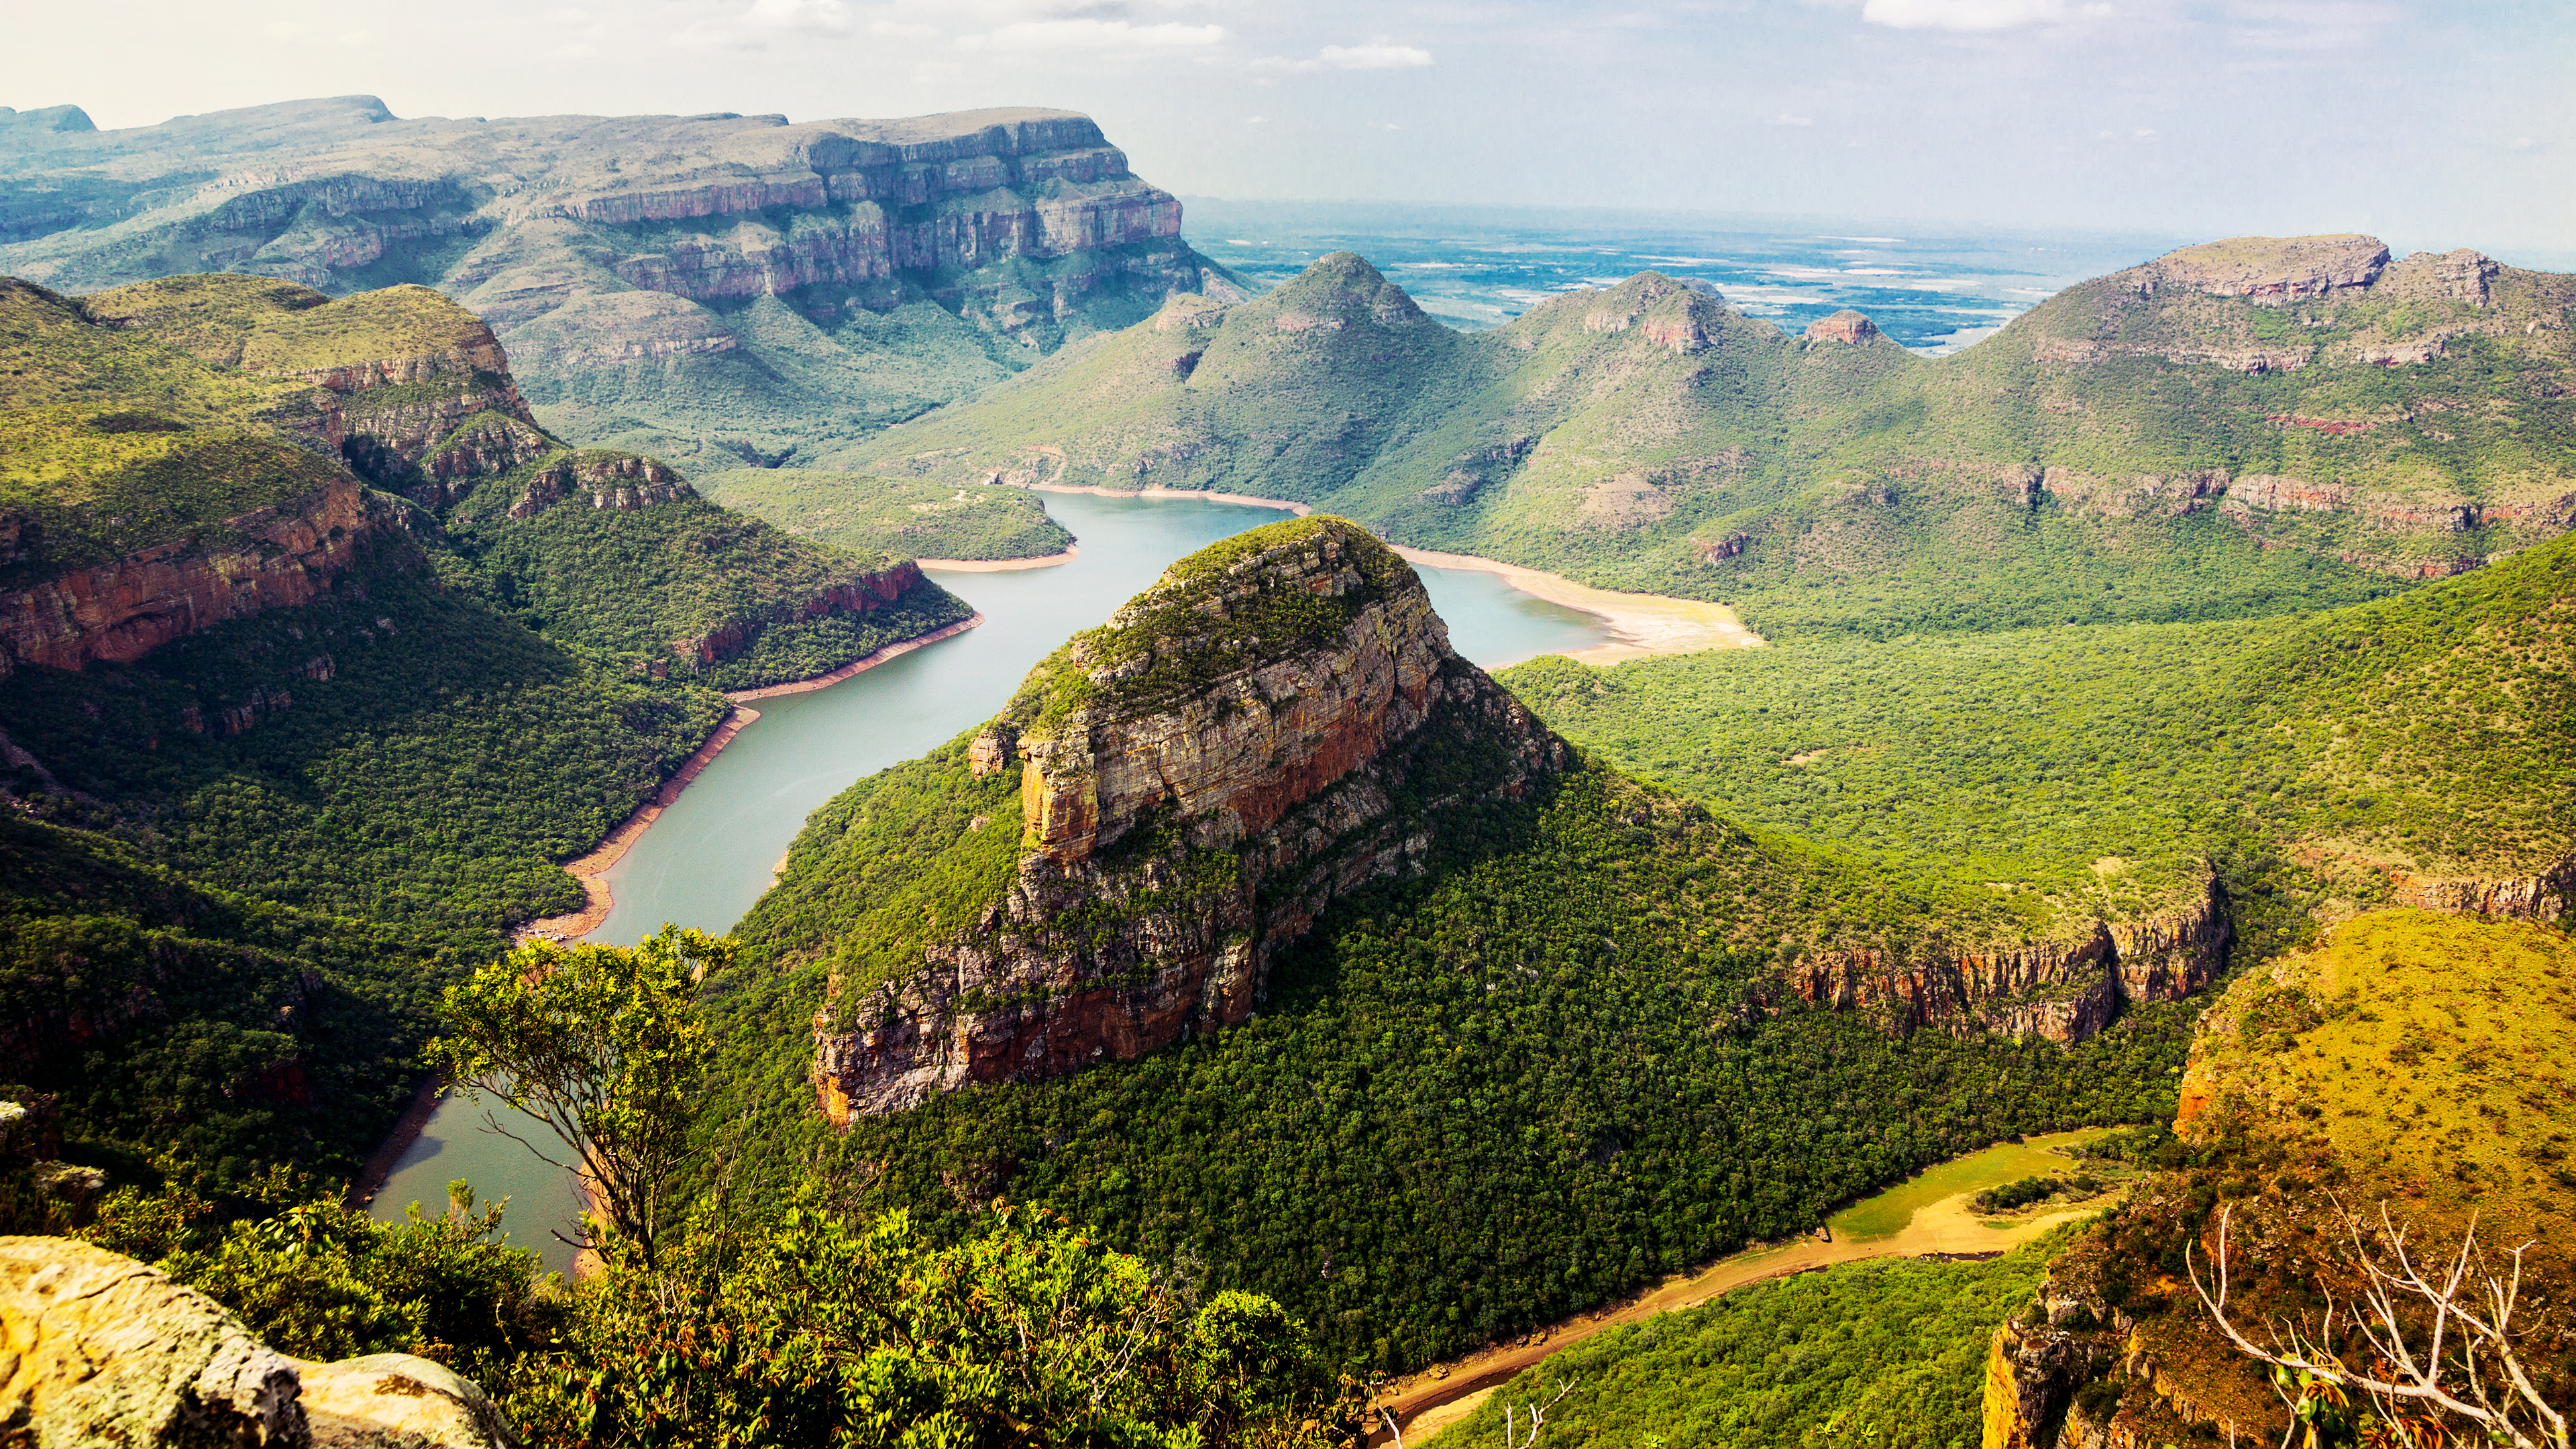 General 3840x2160 nature mountains river trees landscape water canyon South Africa Blyde River Canyon